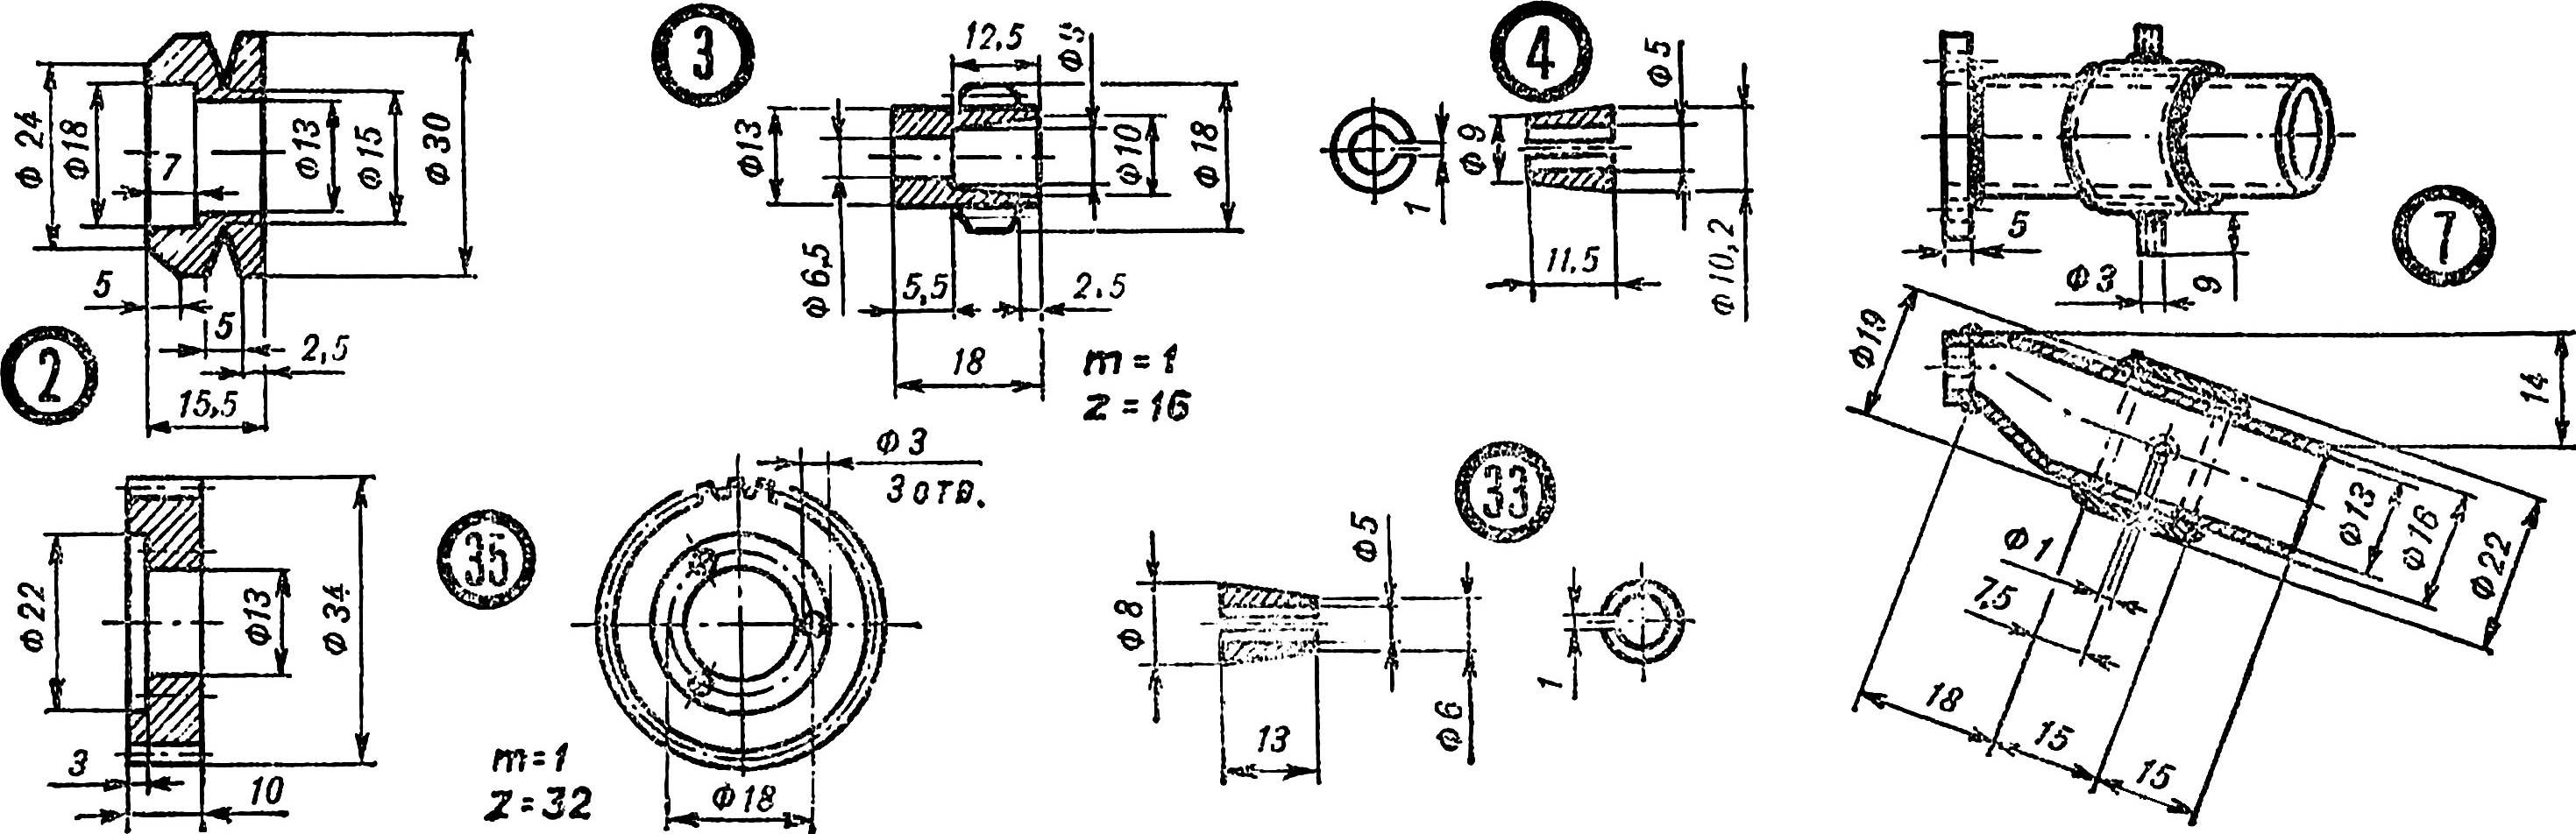 Fig. 3. RC sudomodel for long races with motor working volume of 3.5 cm3.